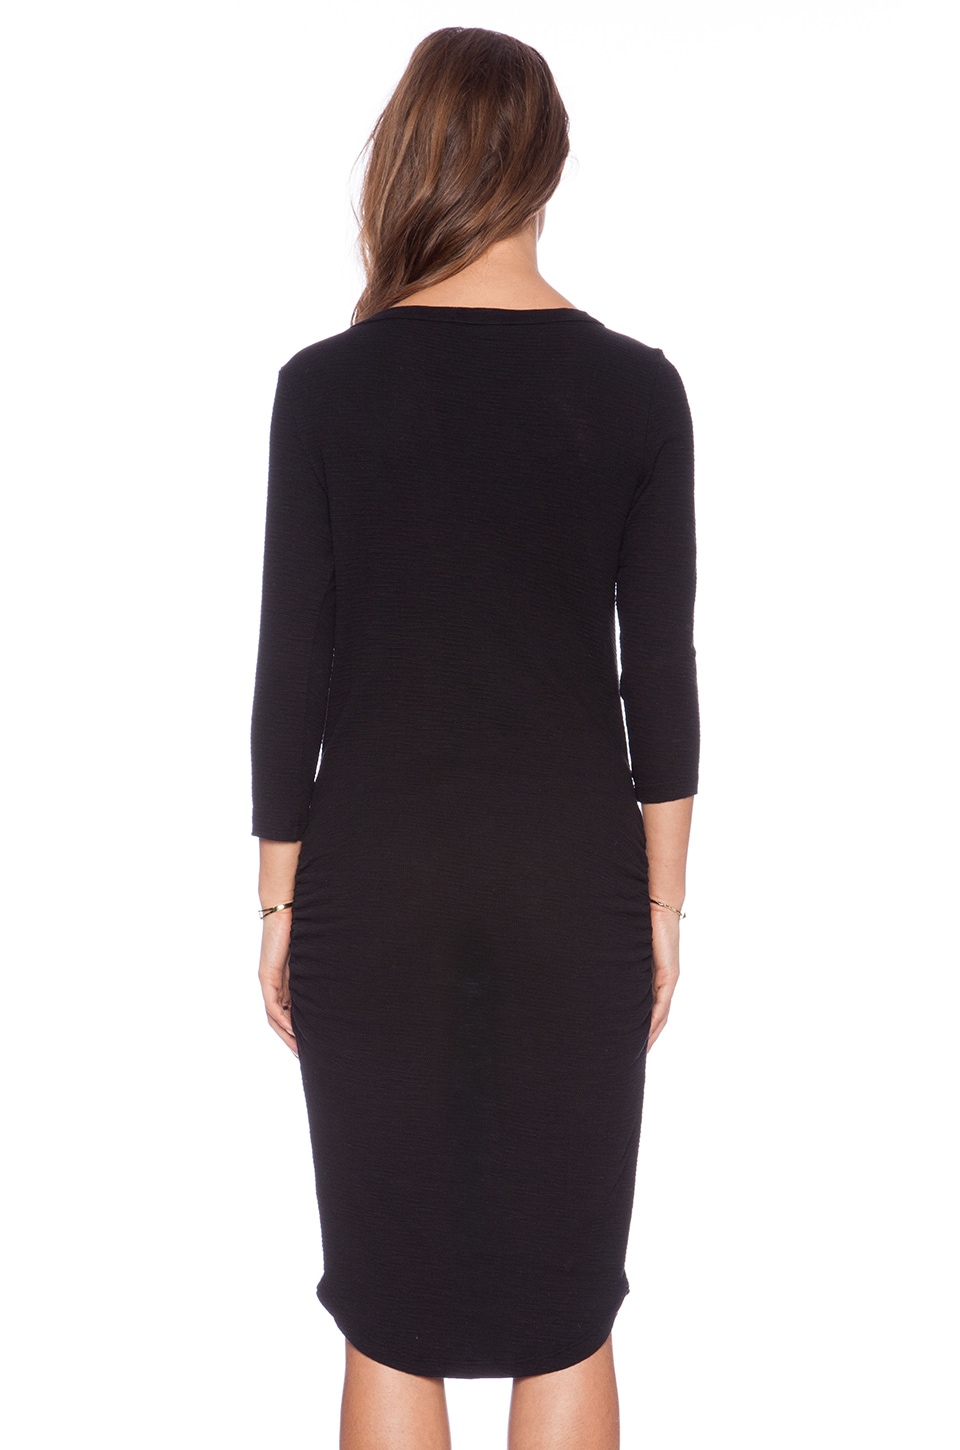 James Perse Thermal Henley Dress in Black | REVOLVE